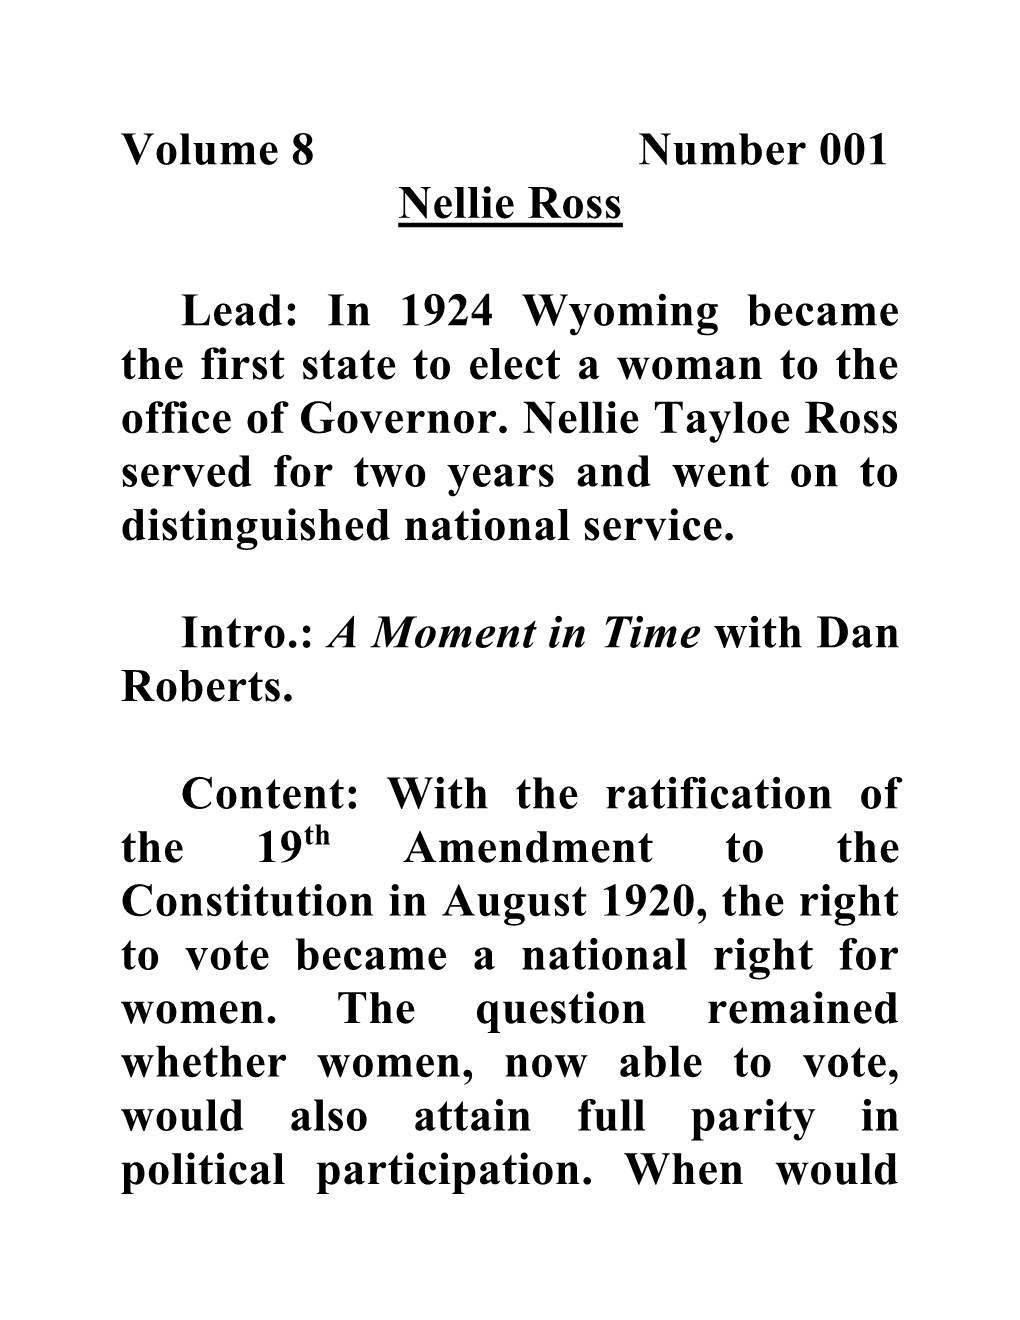 Volume 8 Number 001 Nellie Ross Lead: in 1924 Wyoming Became